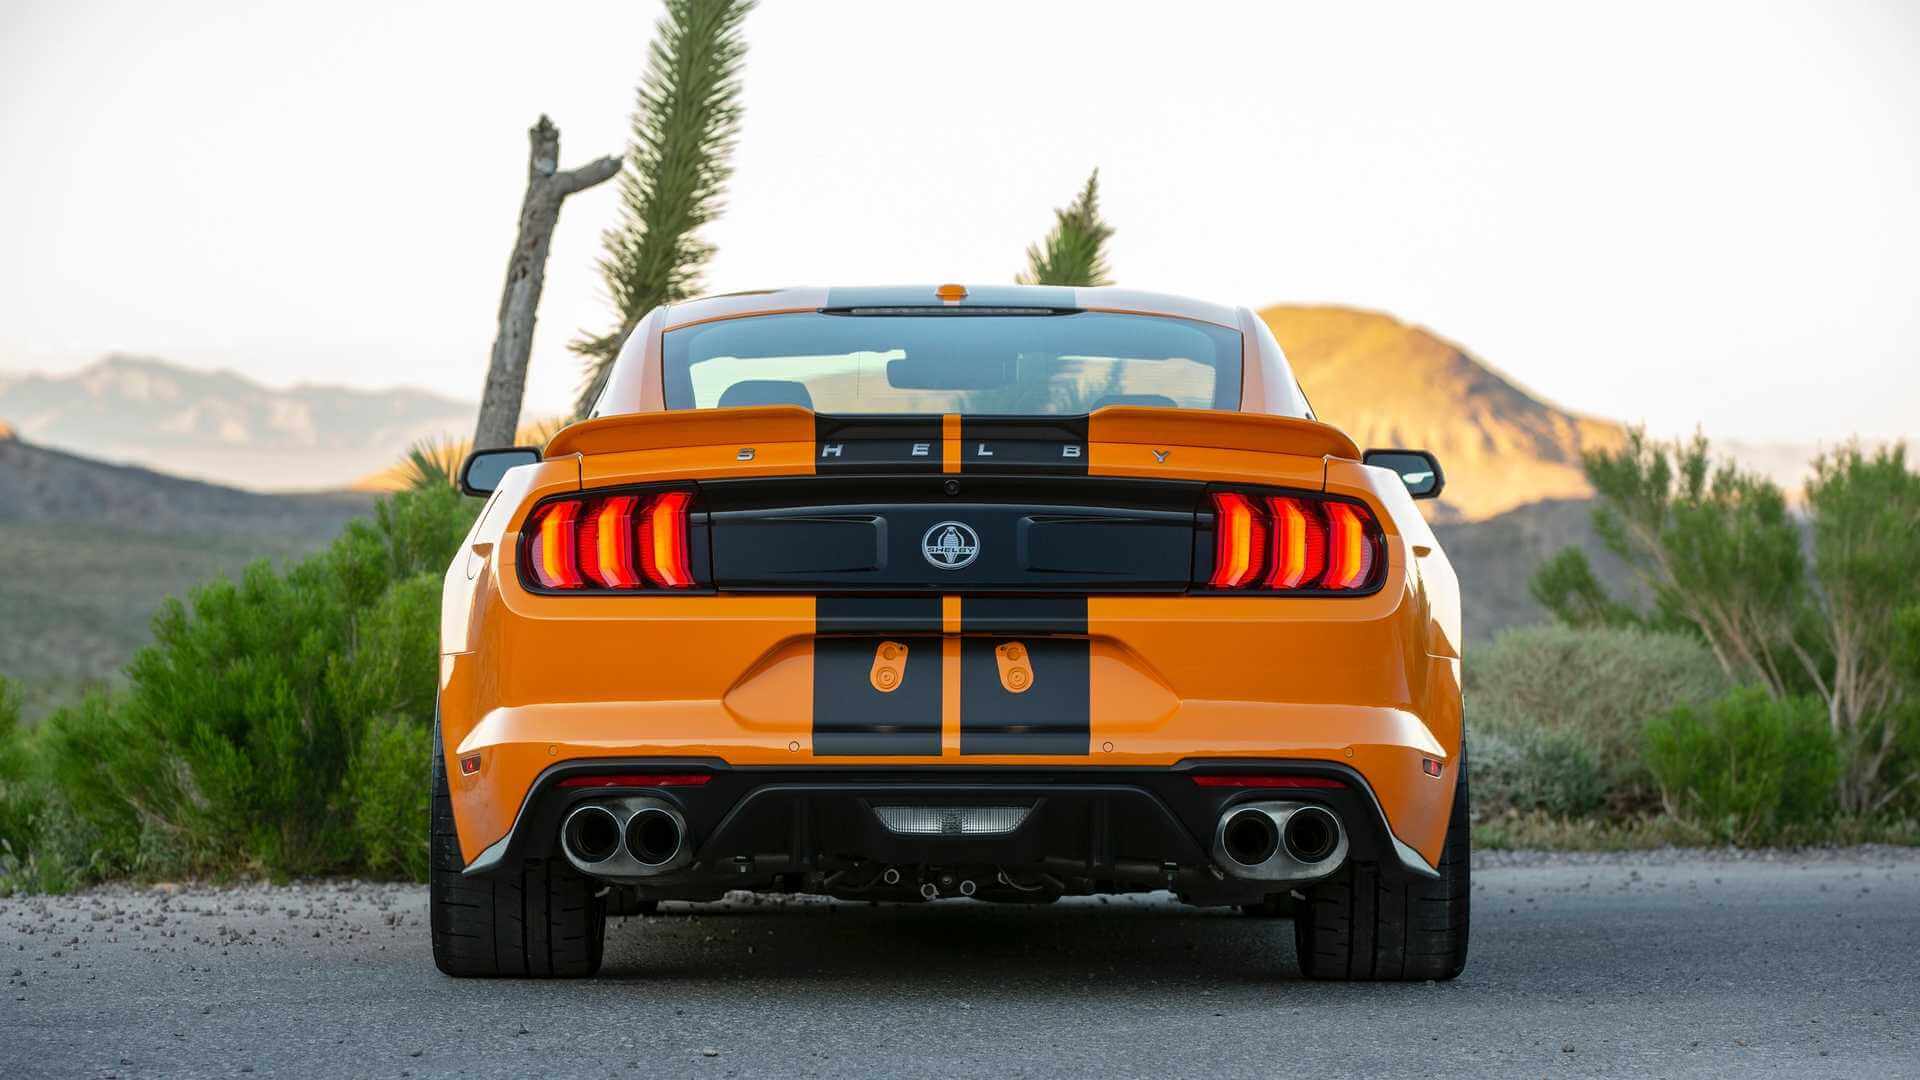 MUSTANG SHELBY GT-S